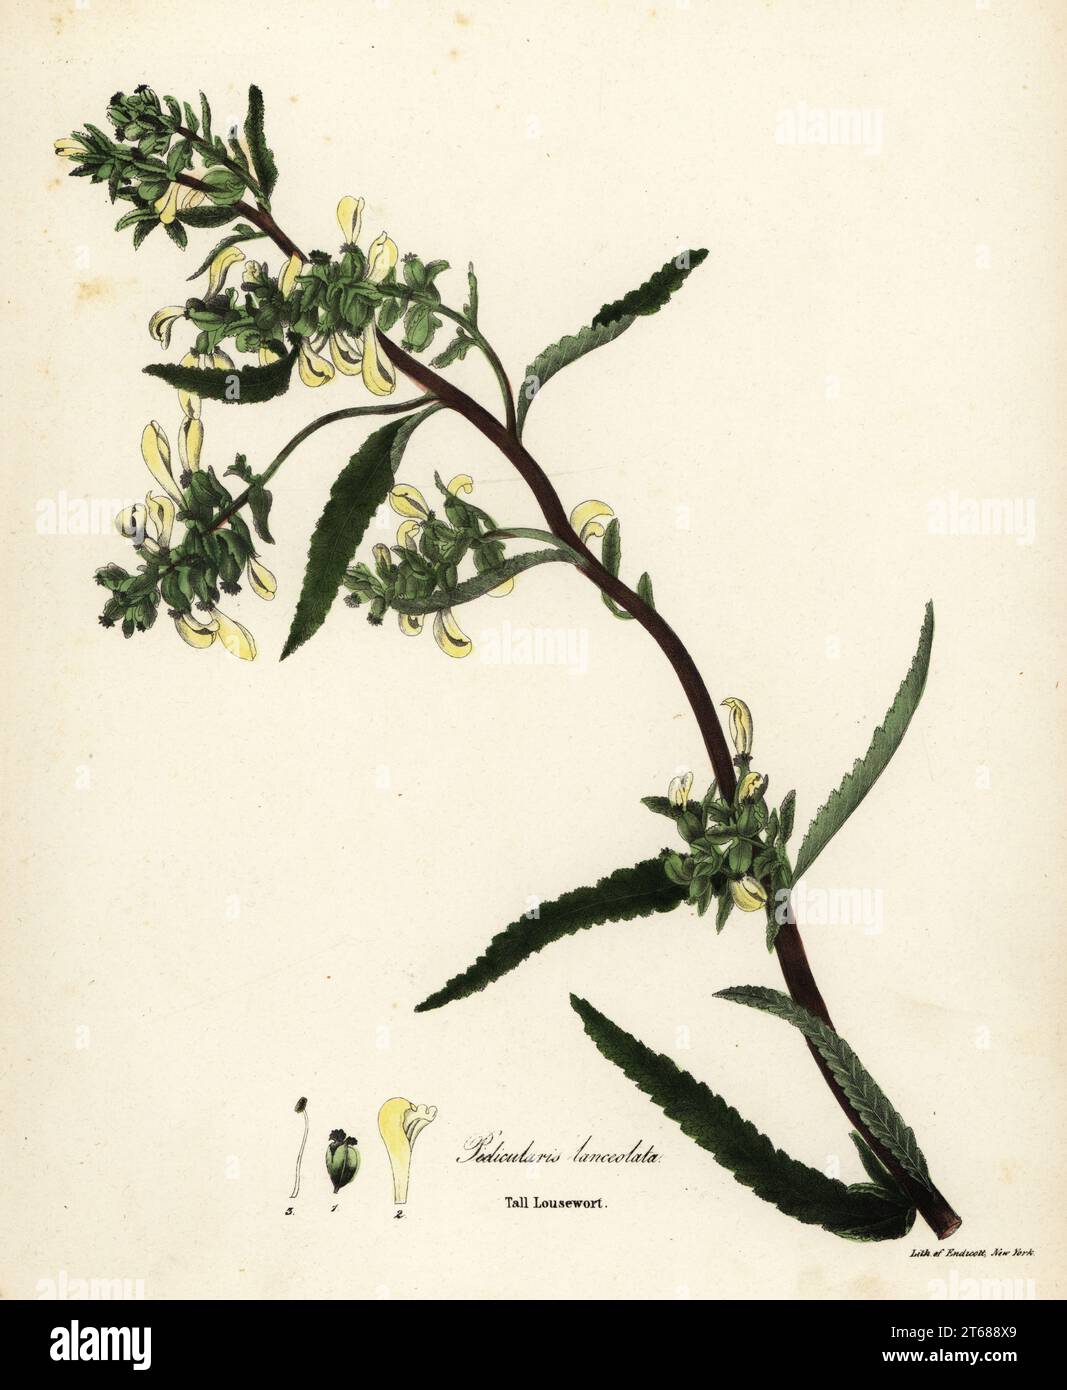 Tall lousewort or swamp lousewort, Pedicularis lanceolata. Handcoloured lithograph by Endicott after a botanical illustration from John Torreys A Flora of the State of New York, Carroll and Cook, Albany, 1843. The plates drawn by John Torrey, Agnes Mitchell, Elizabeth Paoley and Swinton. John Torrey was an American botanist, chemist and physician 1796-1873. Stock Photo